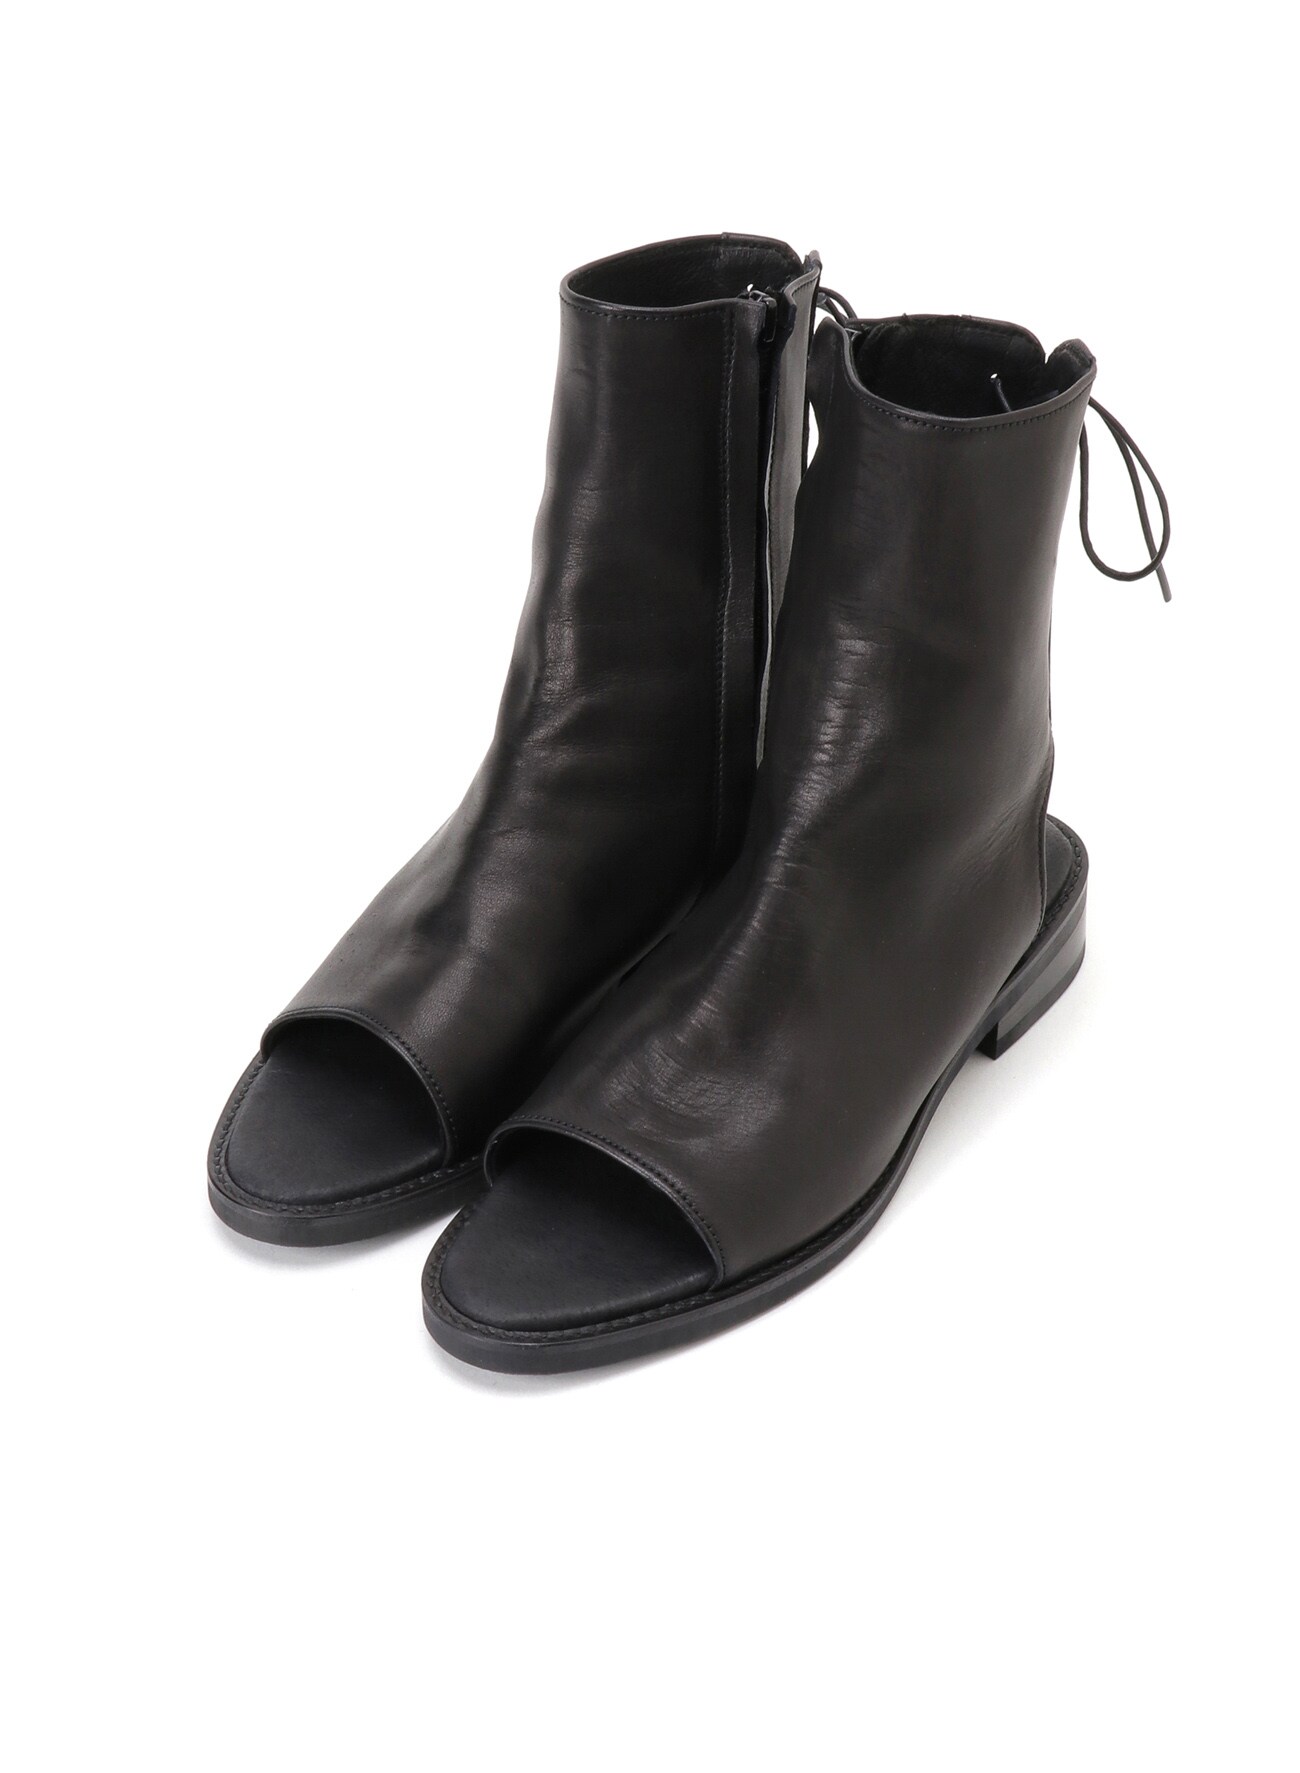 SOFT SMOOTH LEATHER OPEN TOE/HEEL BOOTS